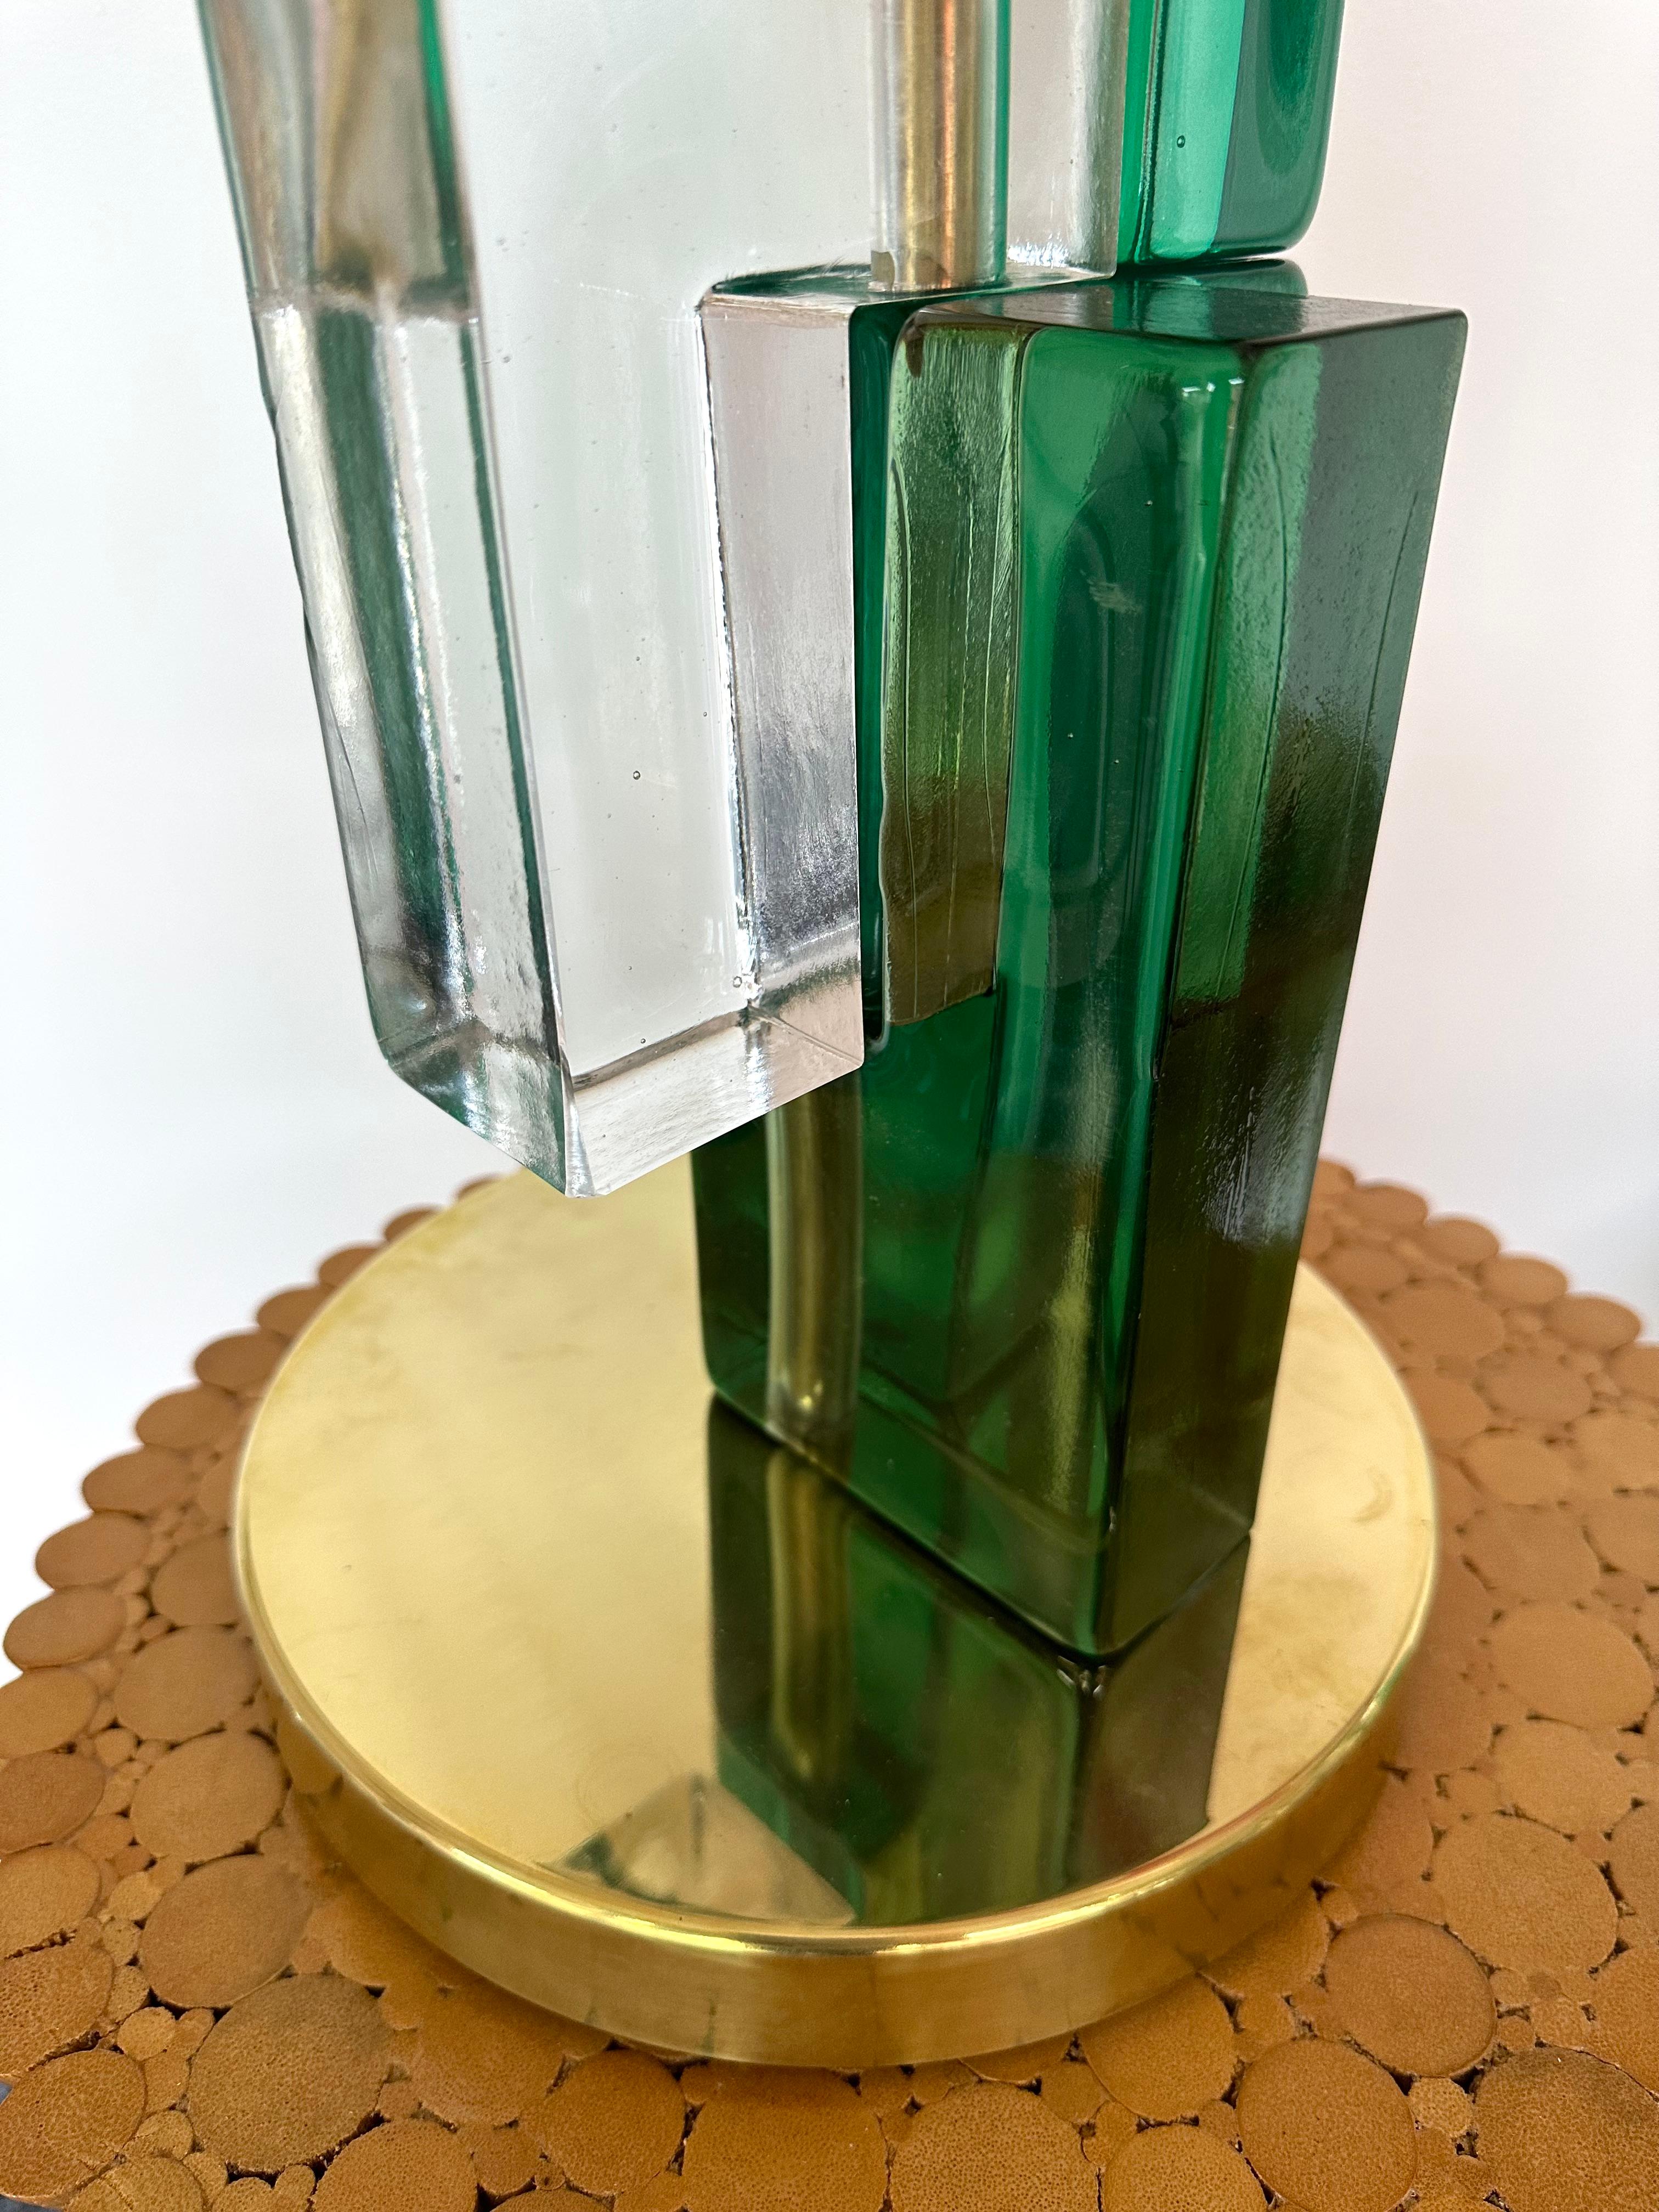 Pressed Contemporary Pair of Lamps Green Cubic Murano Glass and Brass, Italy